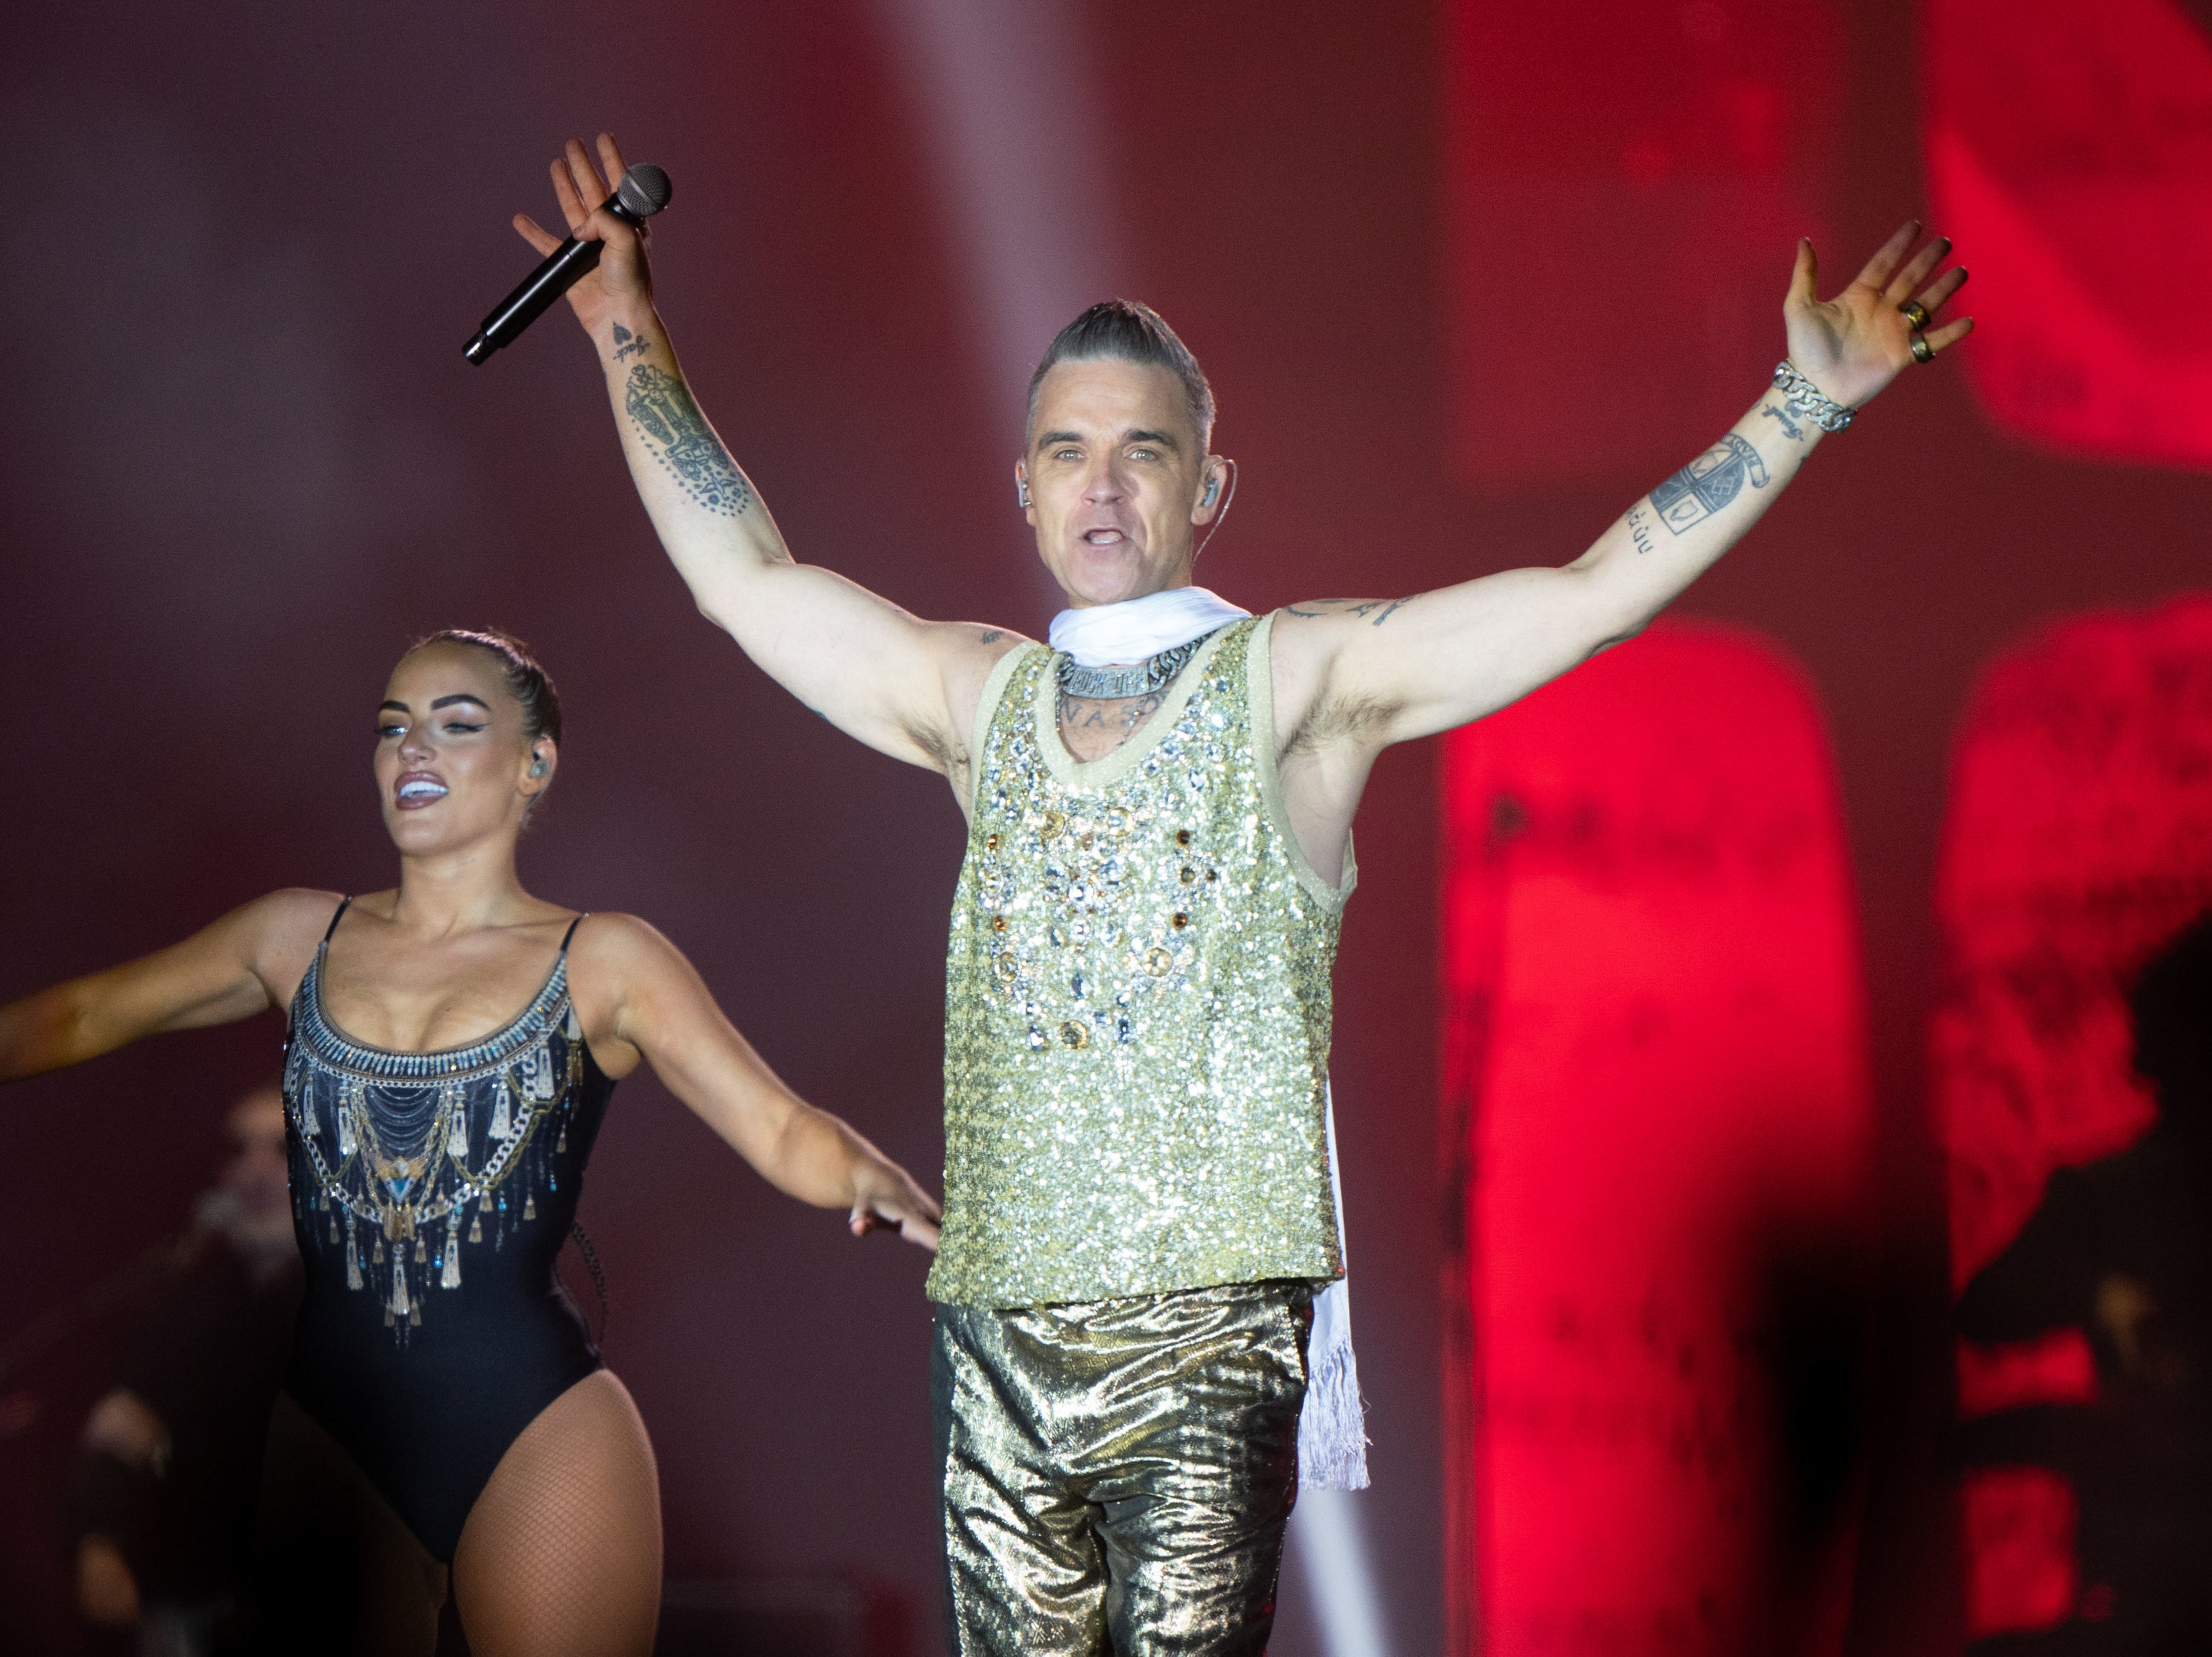 robbie williams, new south wales, taylor swift, sydney, australia, brazil, robbie williams fan dies after falling down six rows of seats at sydney concert